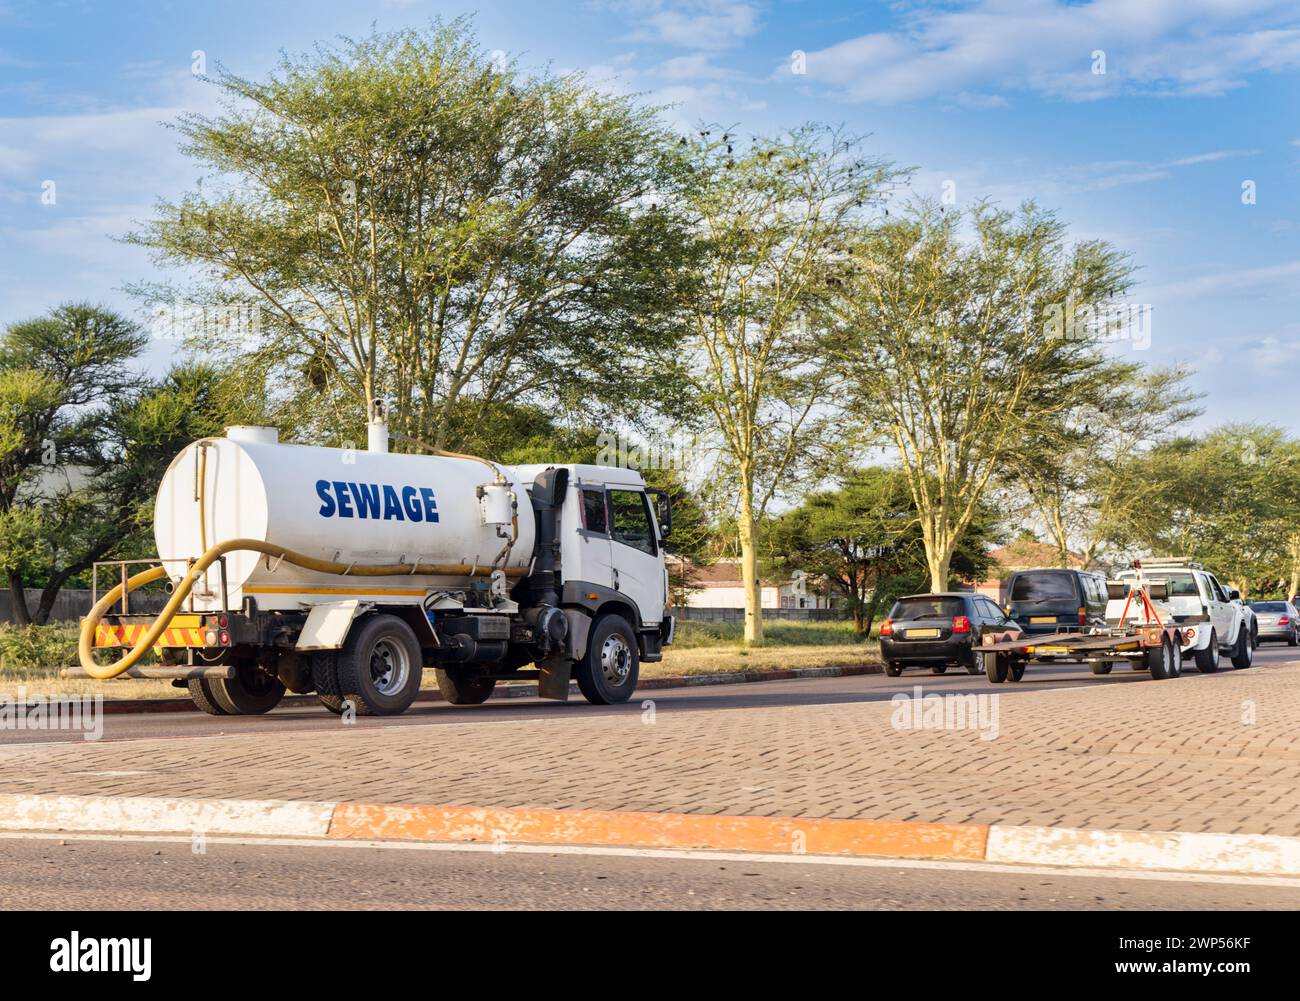 sewage truck on the road at an intersection driving behind few cars and a trailer Stock Photo